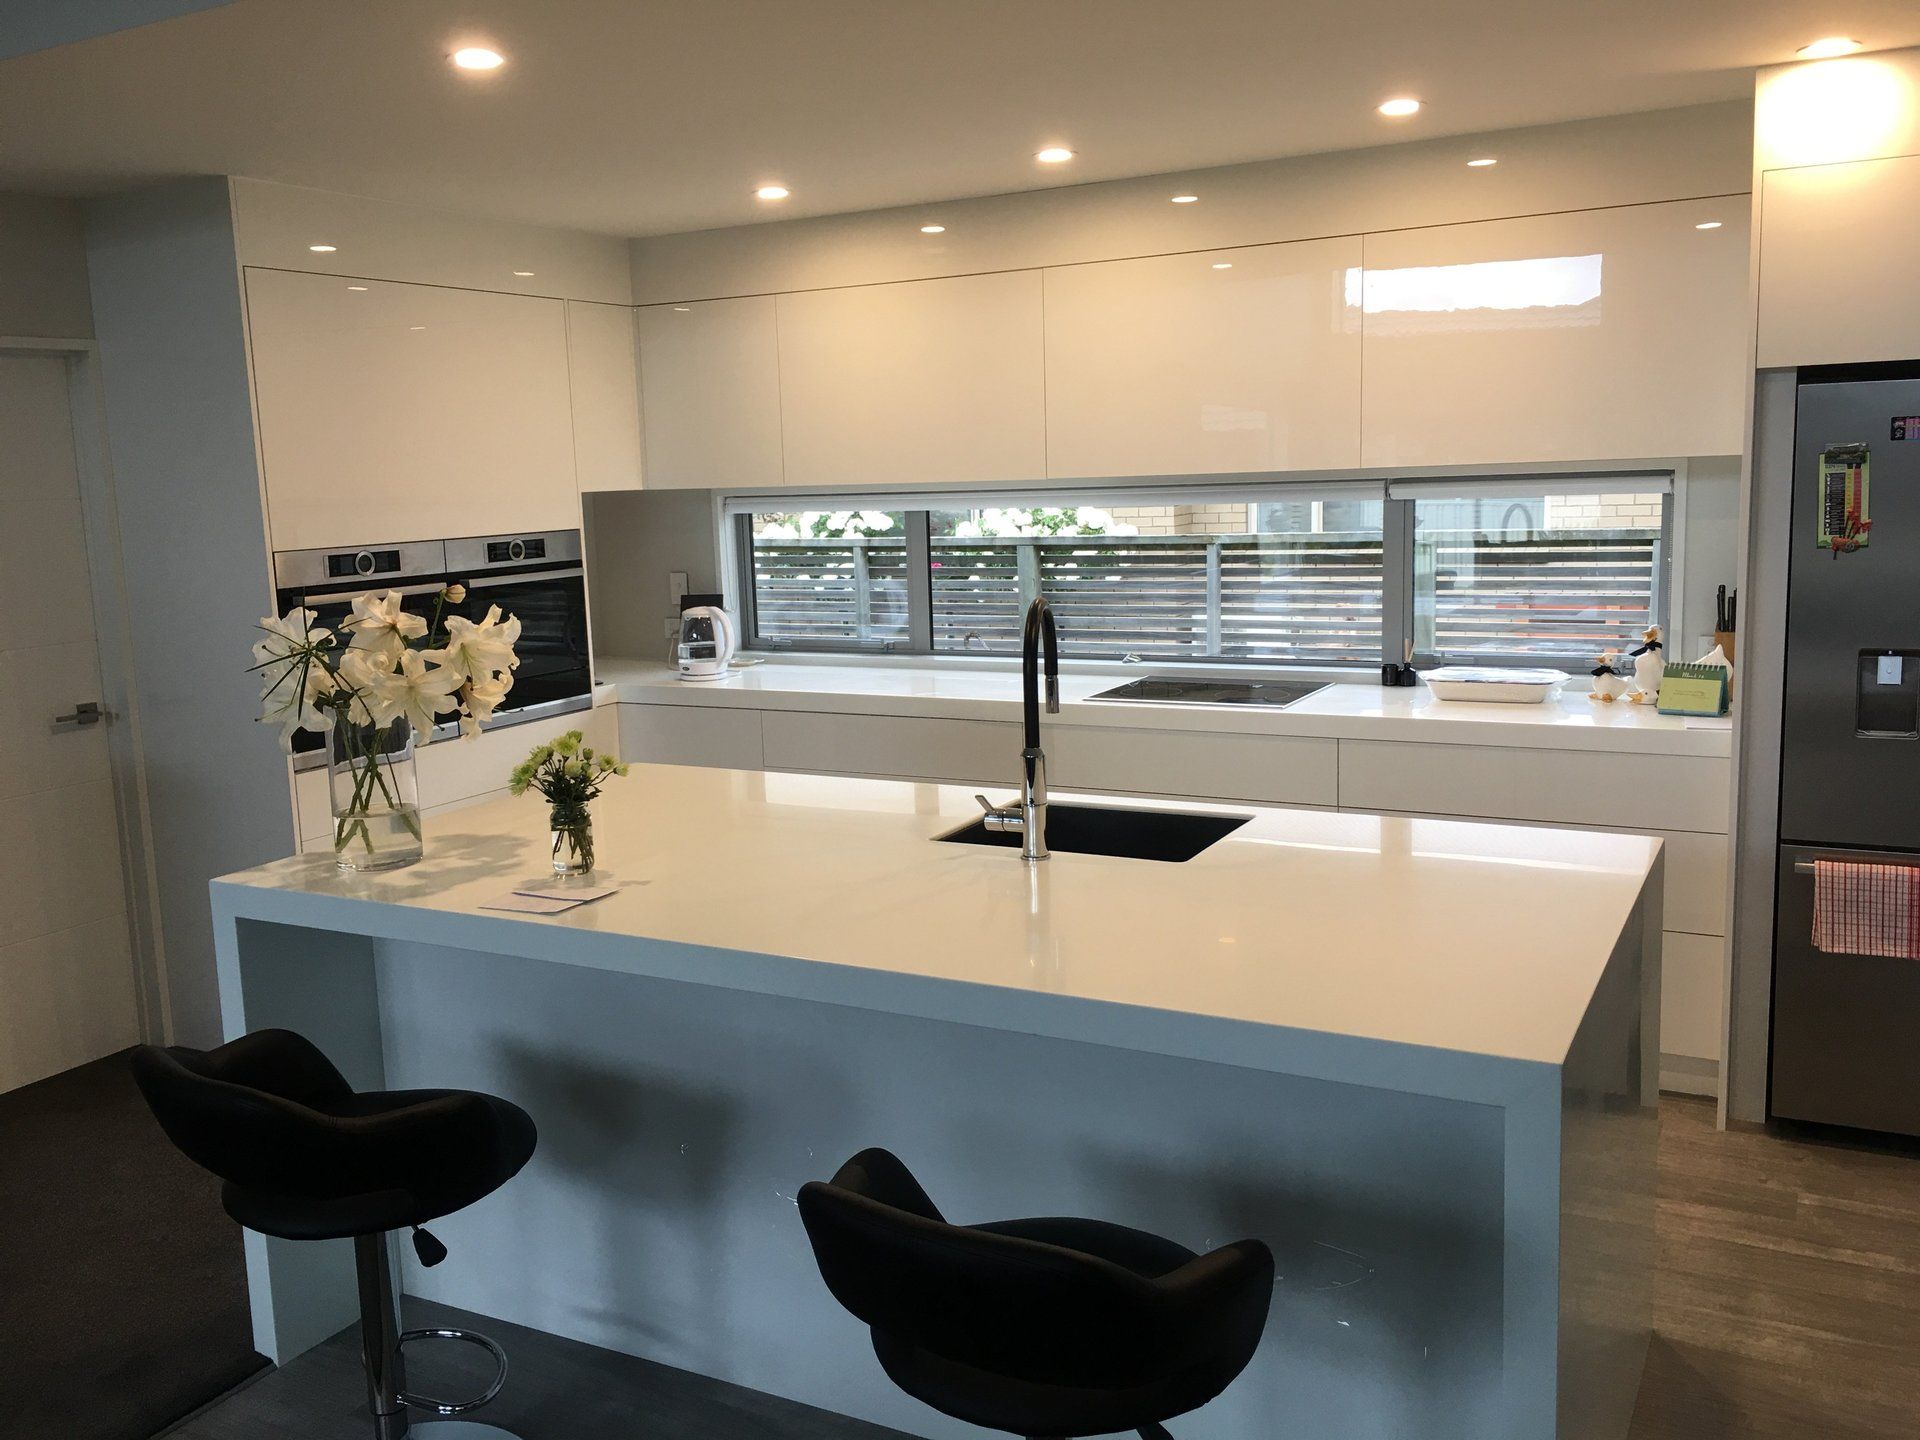 Winton kitchen - design and joinery by Future Kitchens